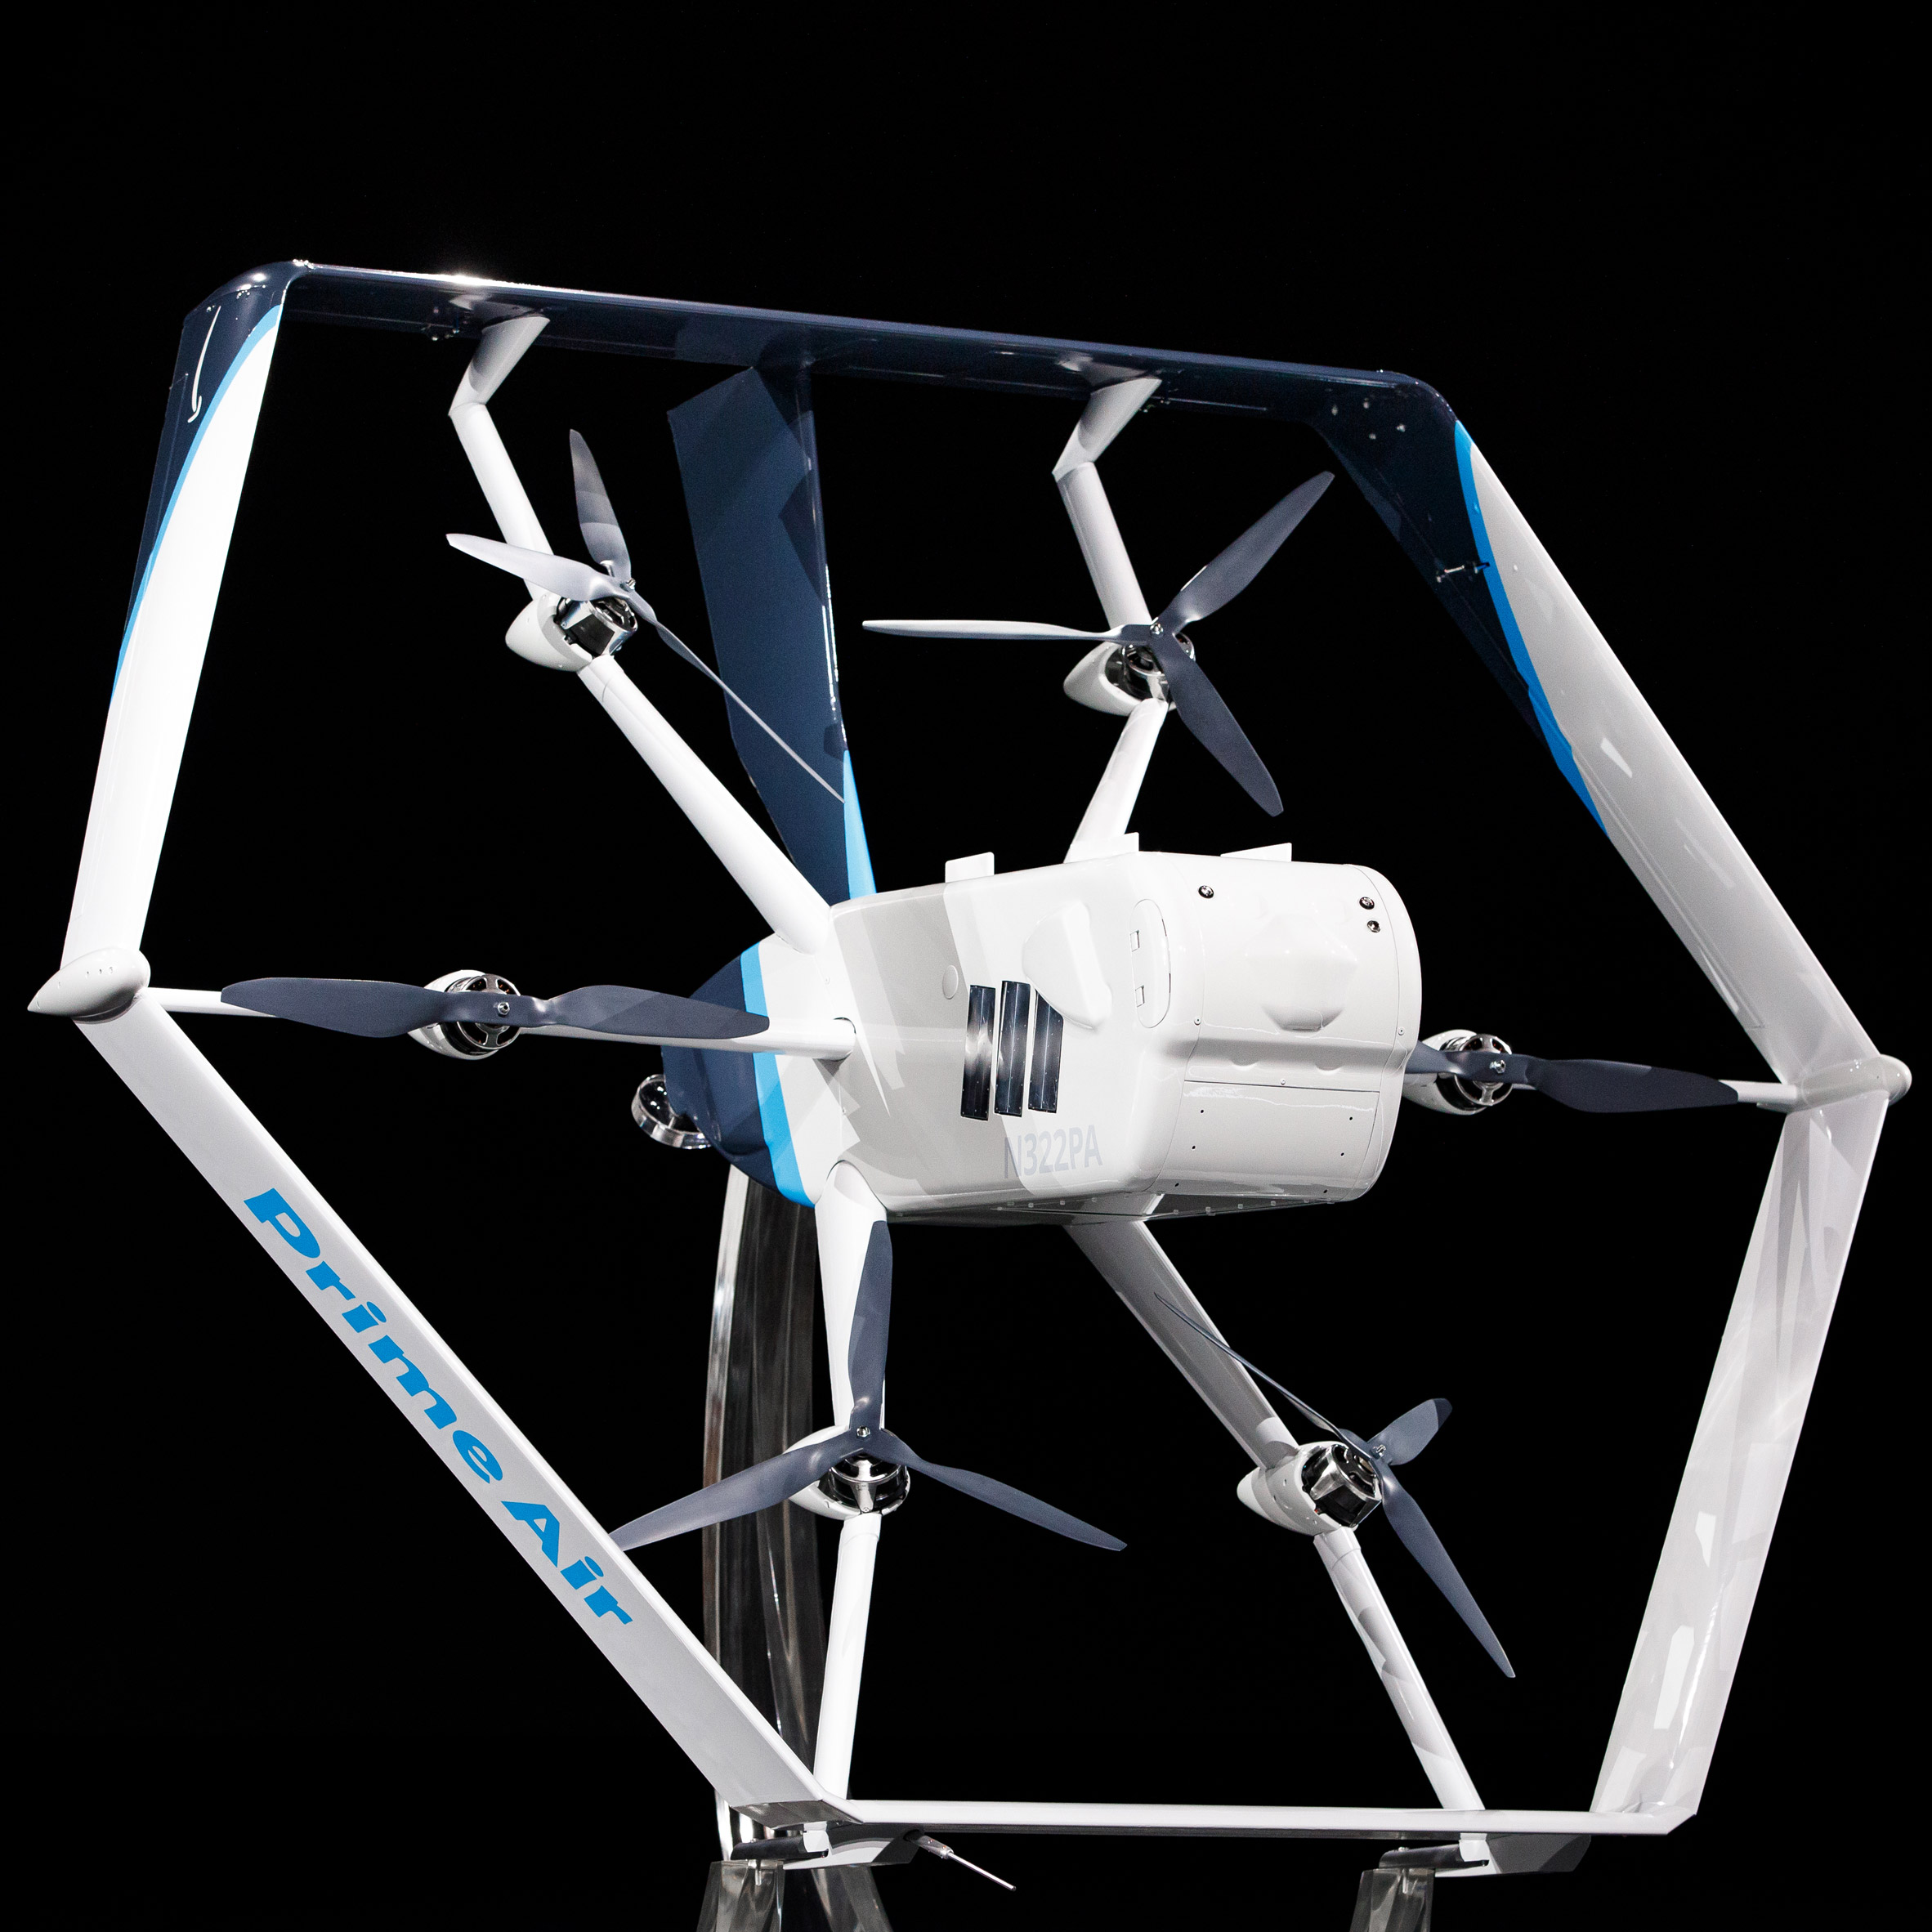 Amazon Prime Air drone to deliver purchases by months"